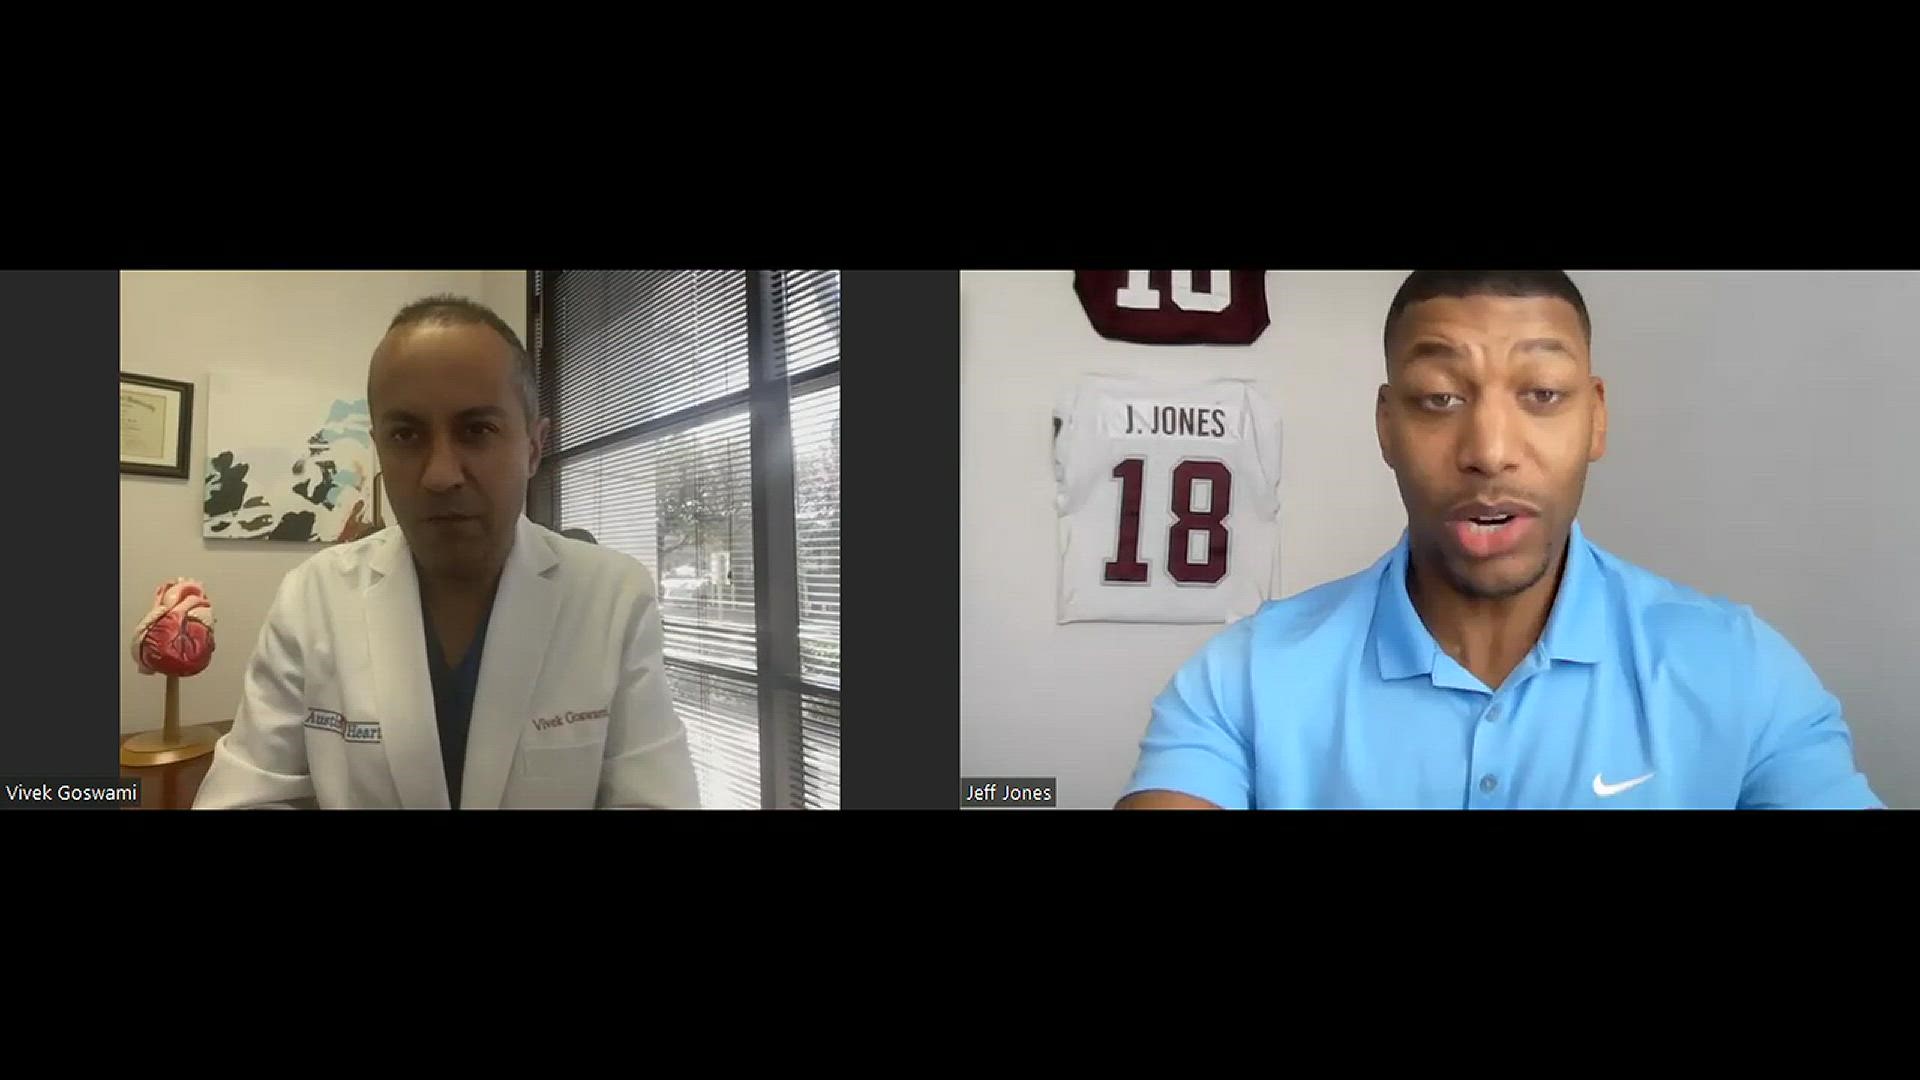 Dr. Vivek Goswami spoke with KVUE Sports Director Jeff Jones about what might have happened to Buffalo Bills safety Damar Hamlin.